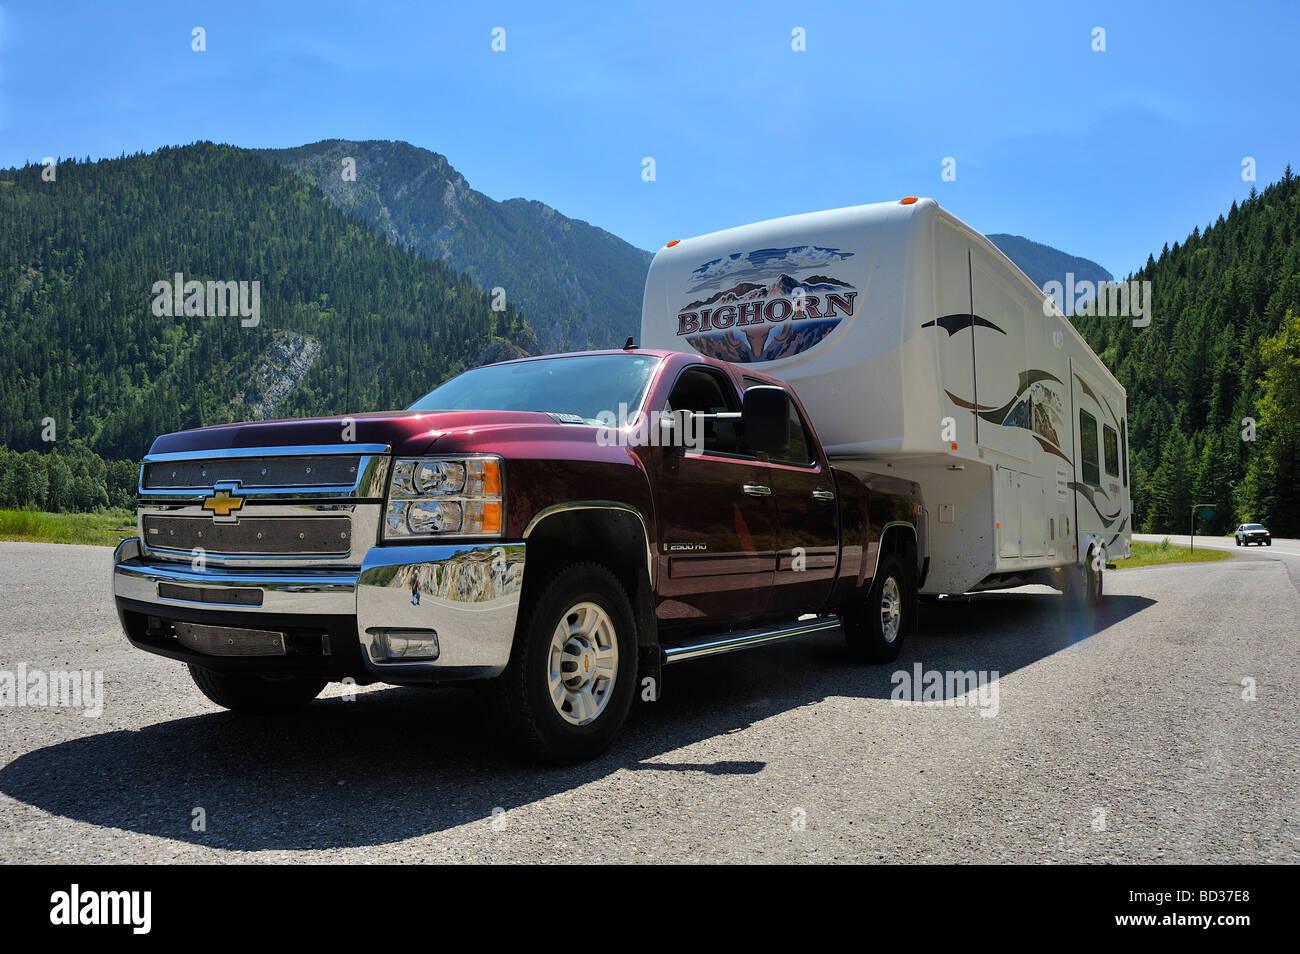 Pick up truck and camper in the mountains Stock Photo